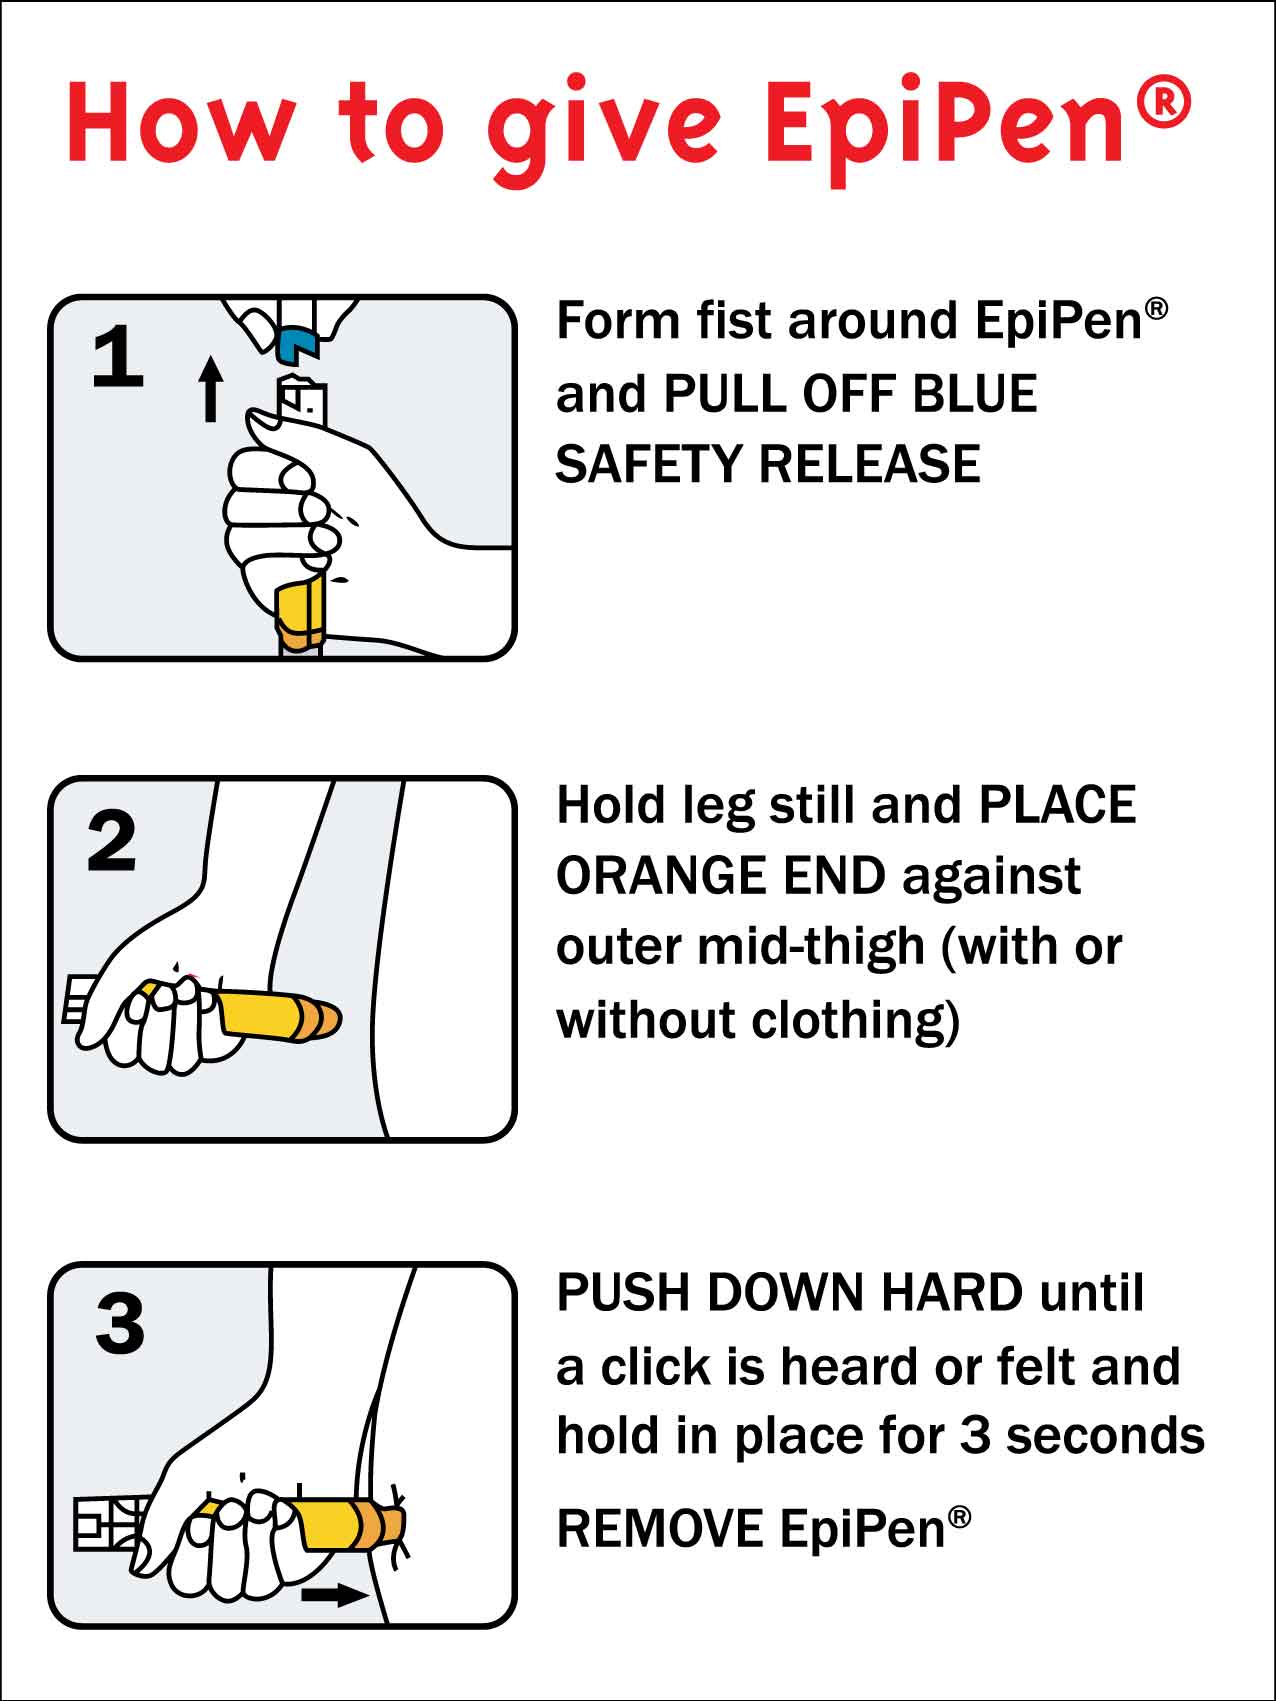 How To Give EpiPen Sign